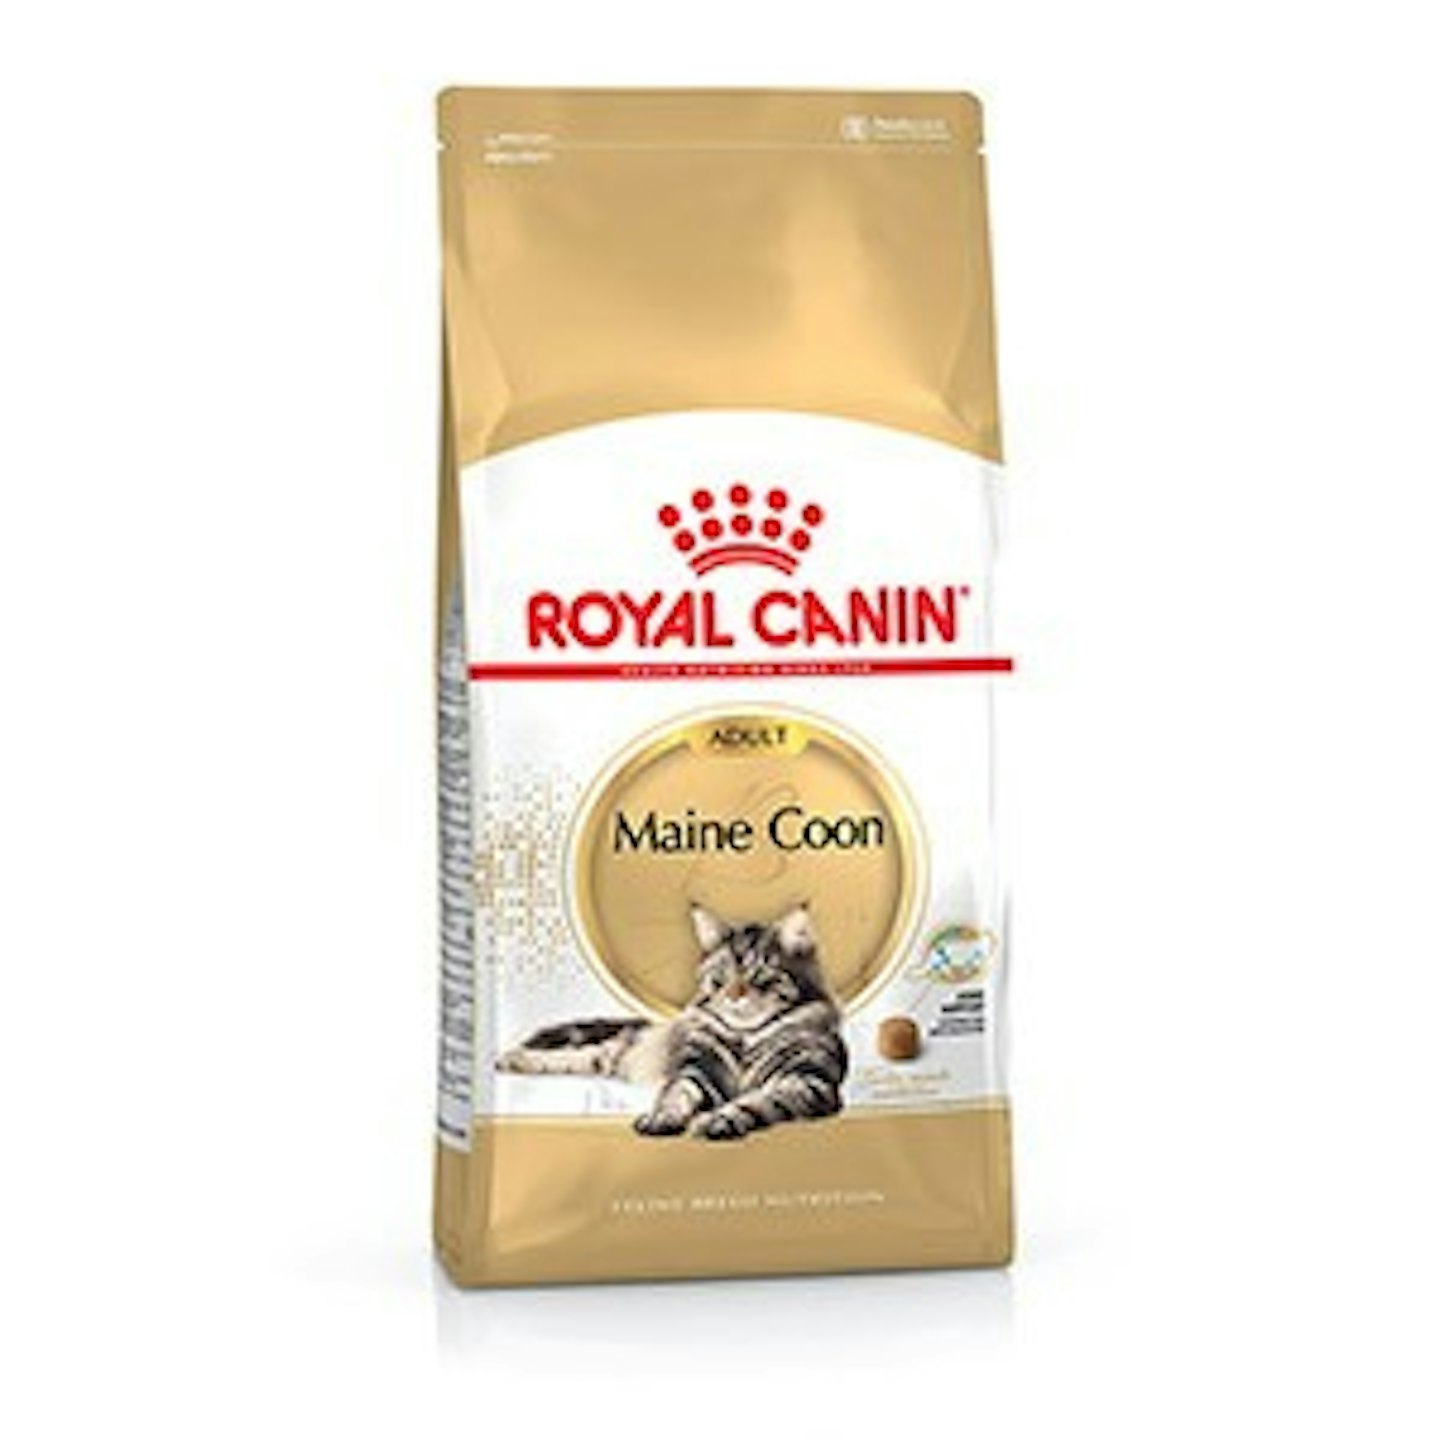 Royal Canin Feline Breed Maine Coon Dry Adult Cat Food 2kg